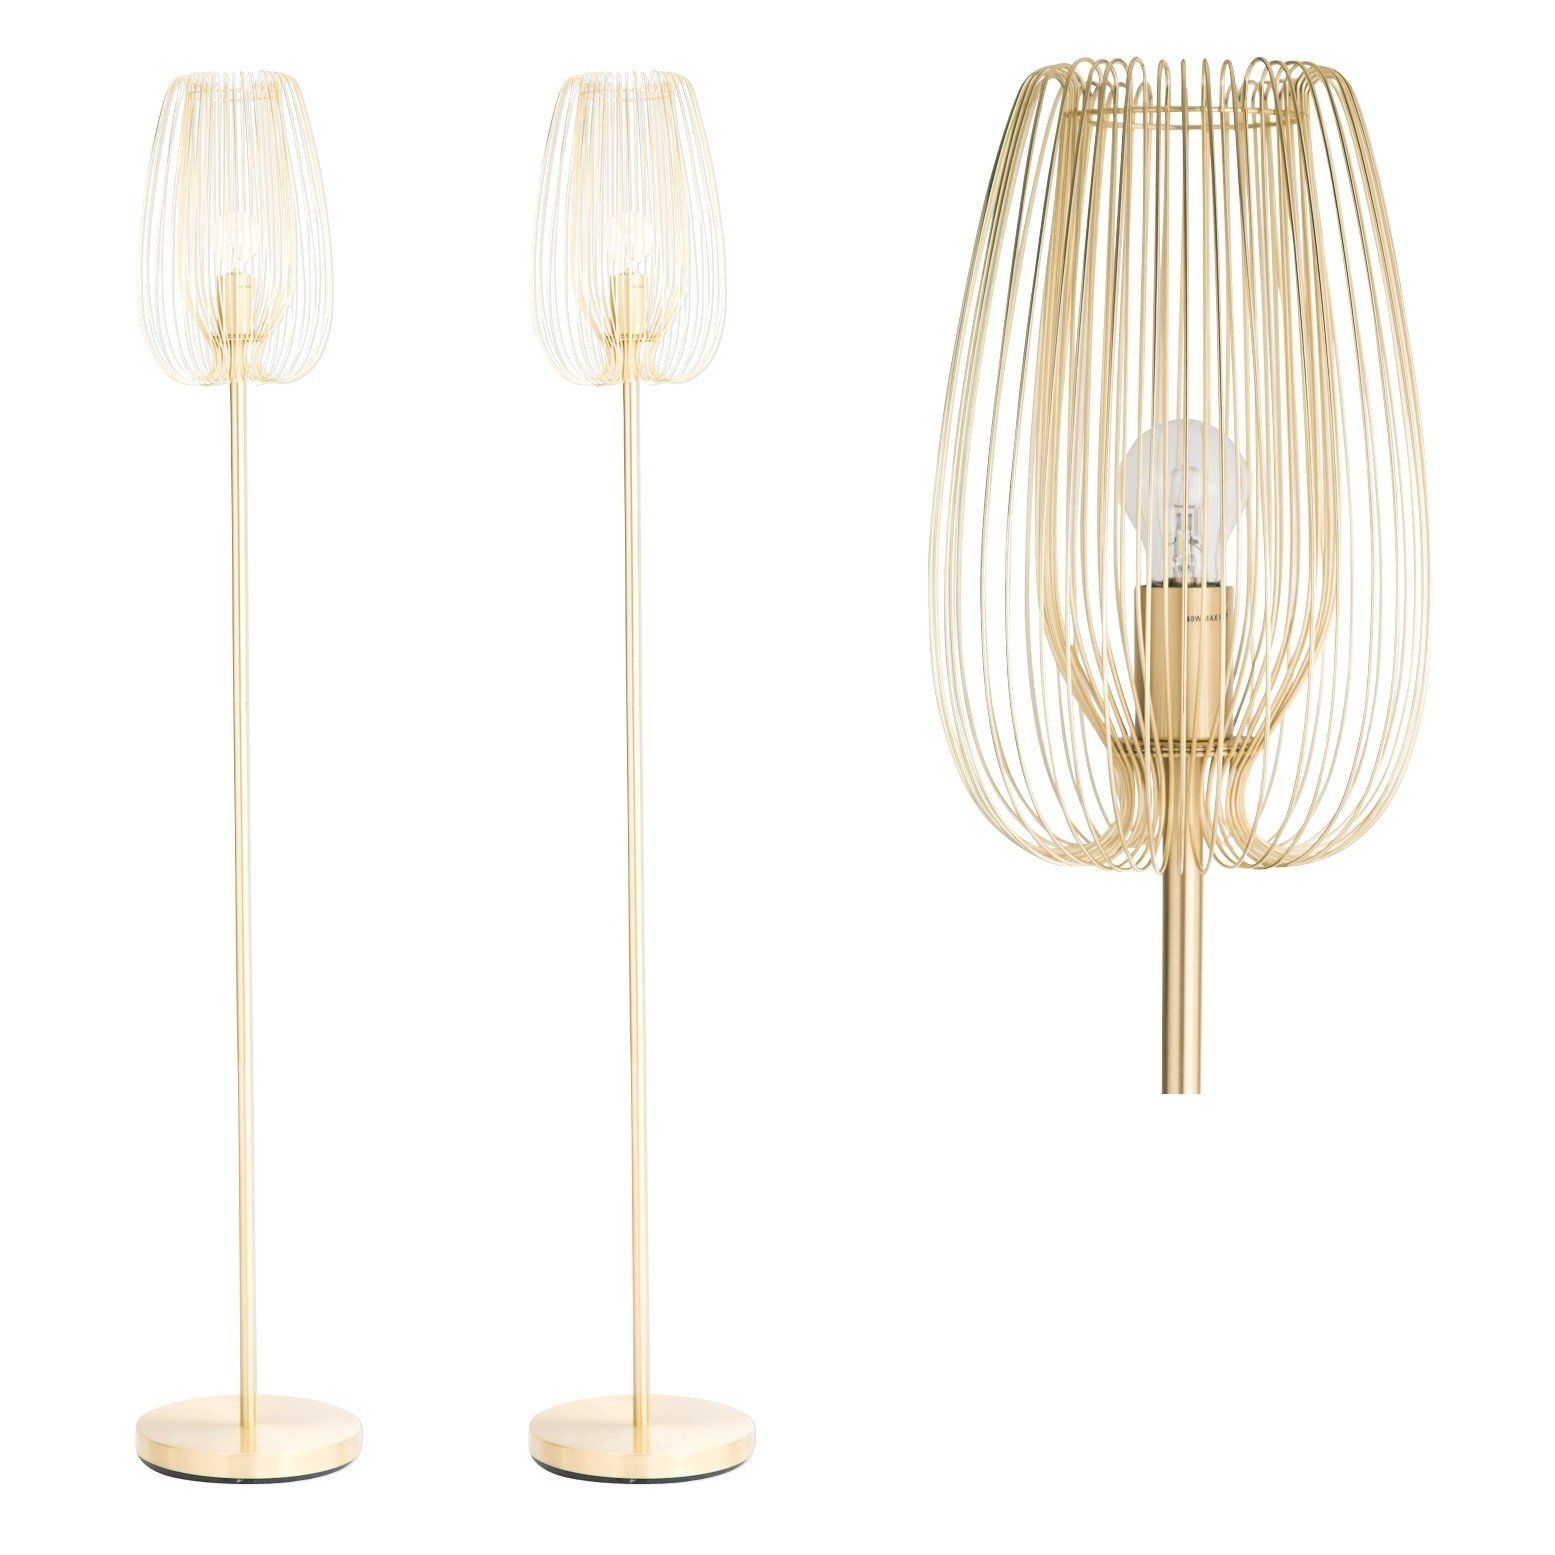 Set Of 2 Brushed Gold Metal Wire Floor Lamps In Metal Brushed Floor Lamps (View 15 of 15)